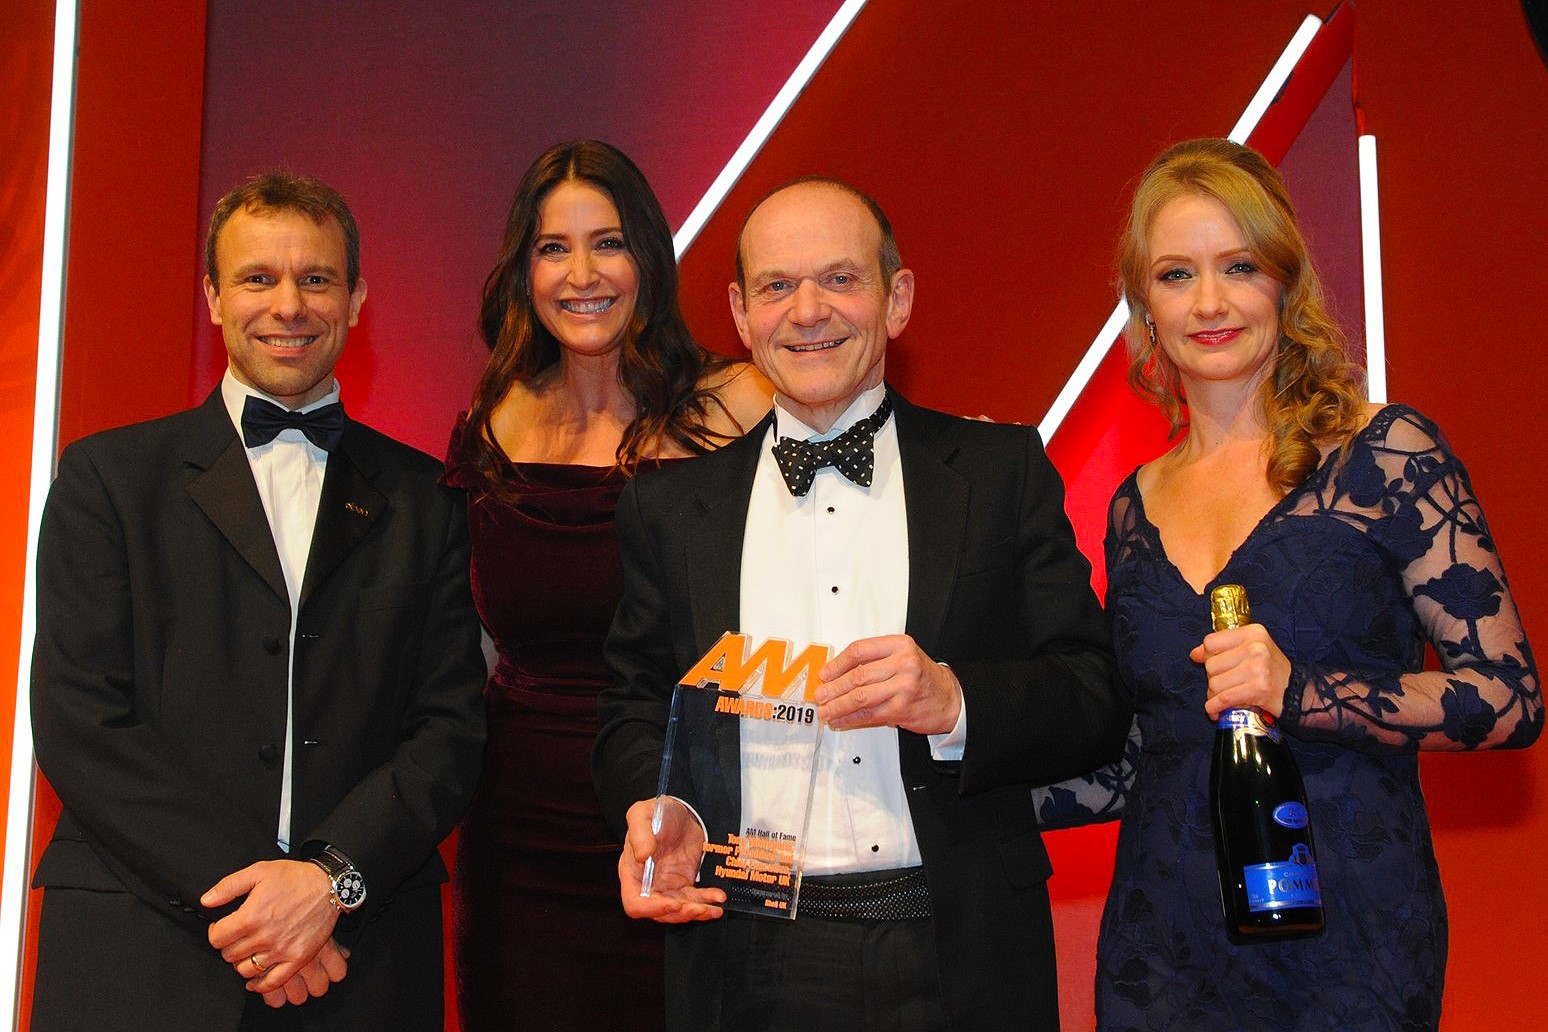 Tony Whitehorn, former chief executive, Hyundai Motor UK, accepts the award from Katie Rugen, UK automotive sales team lead, Shell UK, right, AM editor-in-chief Stephen Briers, left, and host Lisa Snowdon, second from left